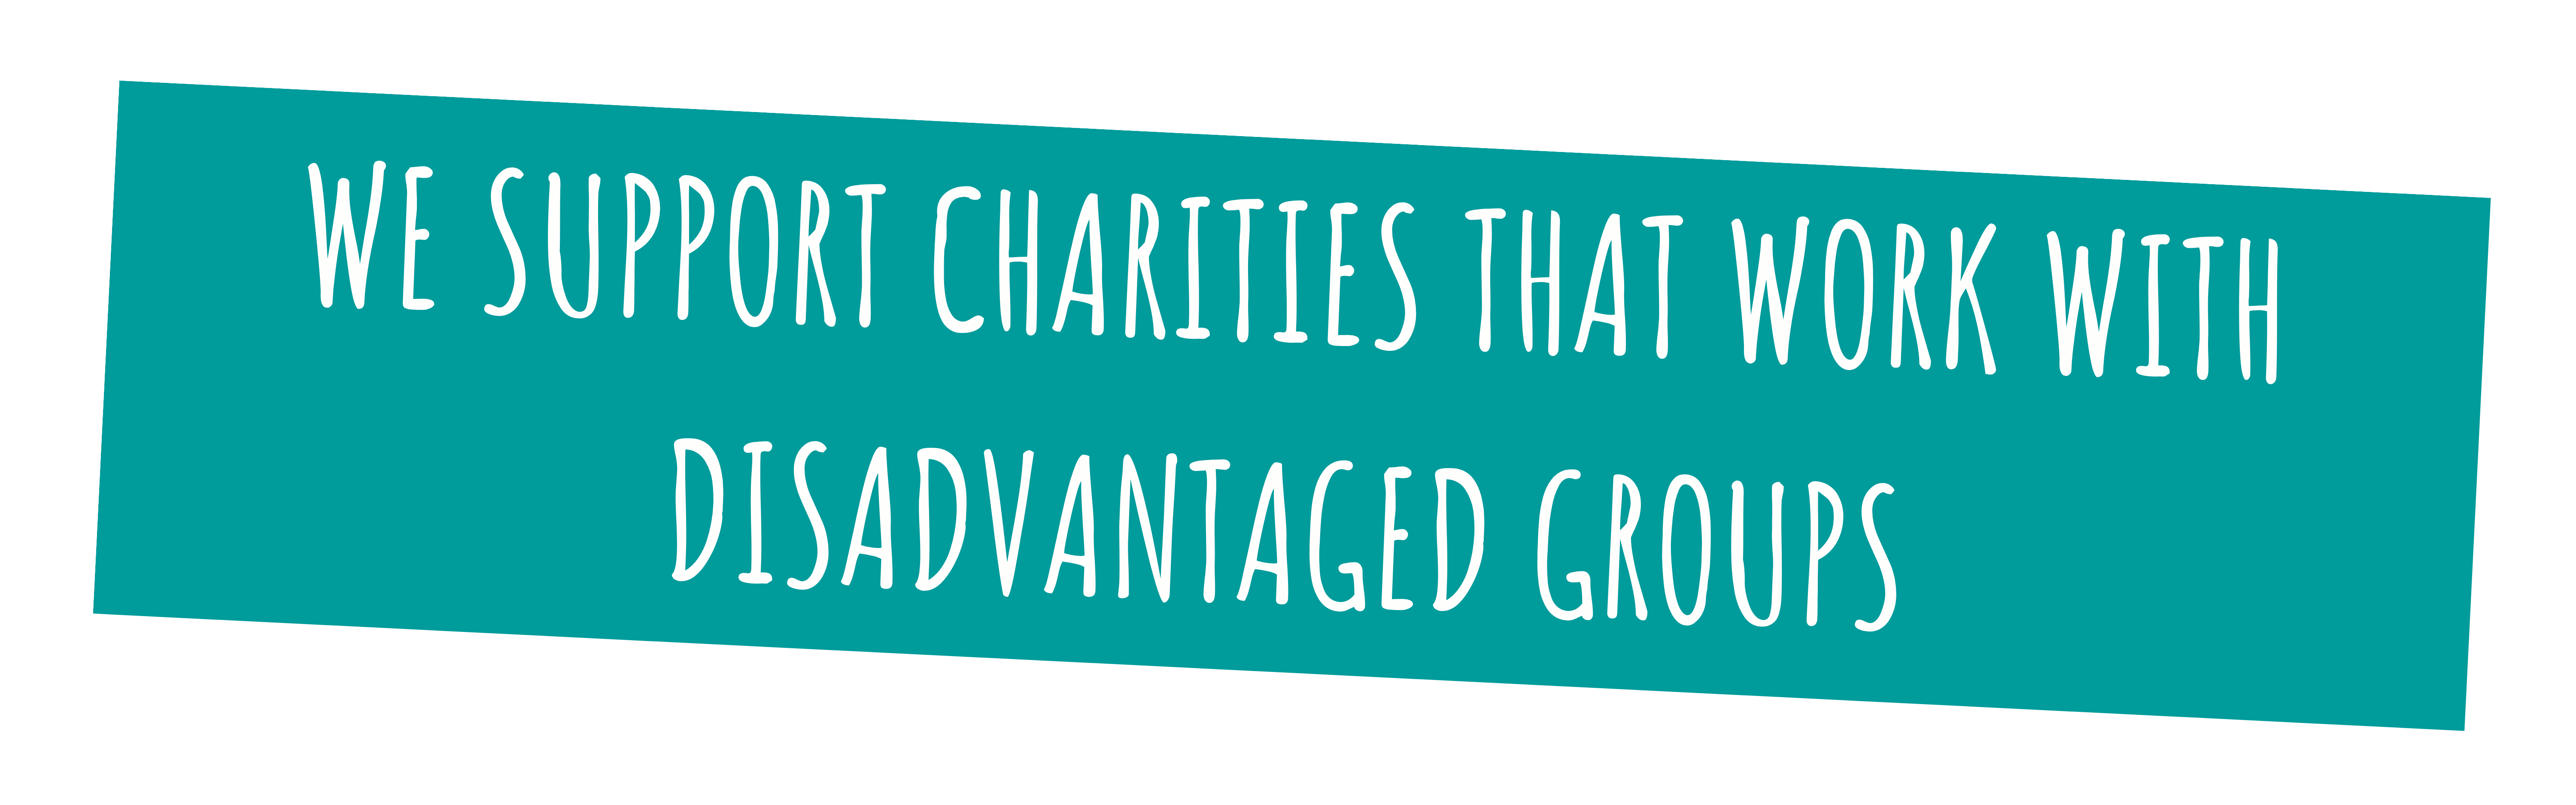 We support charities that work with disadvantaged groups